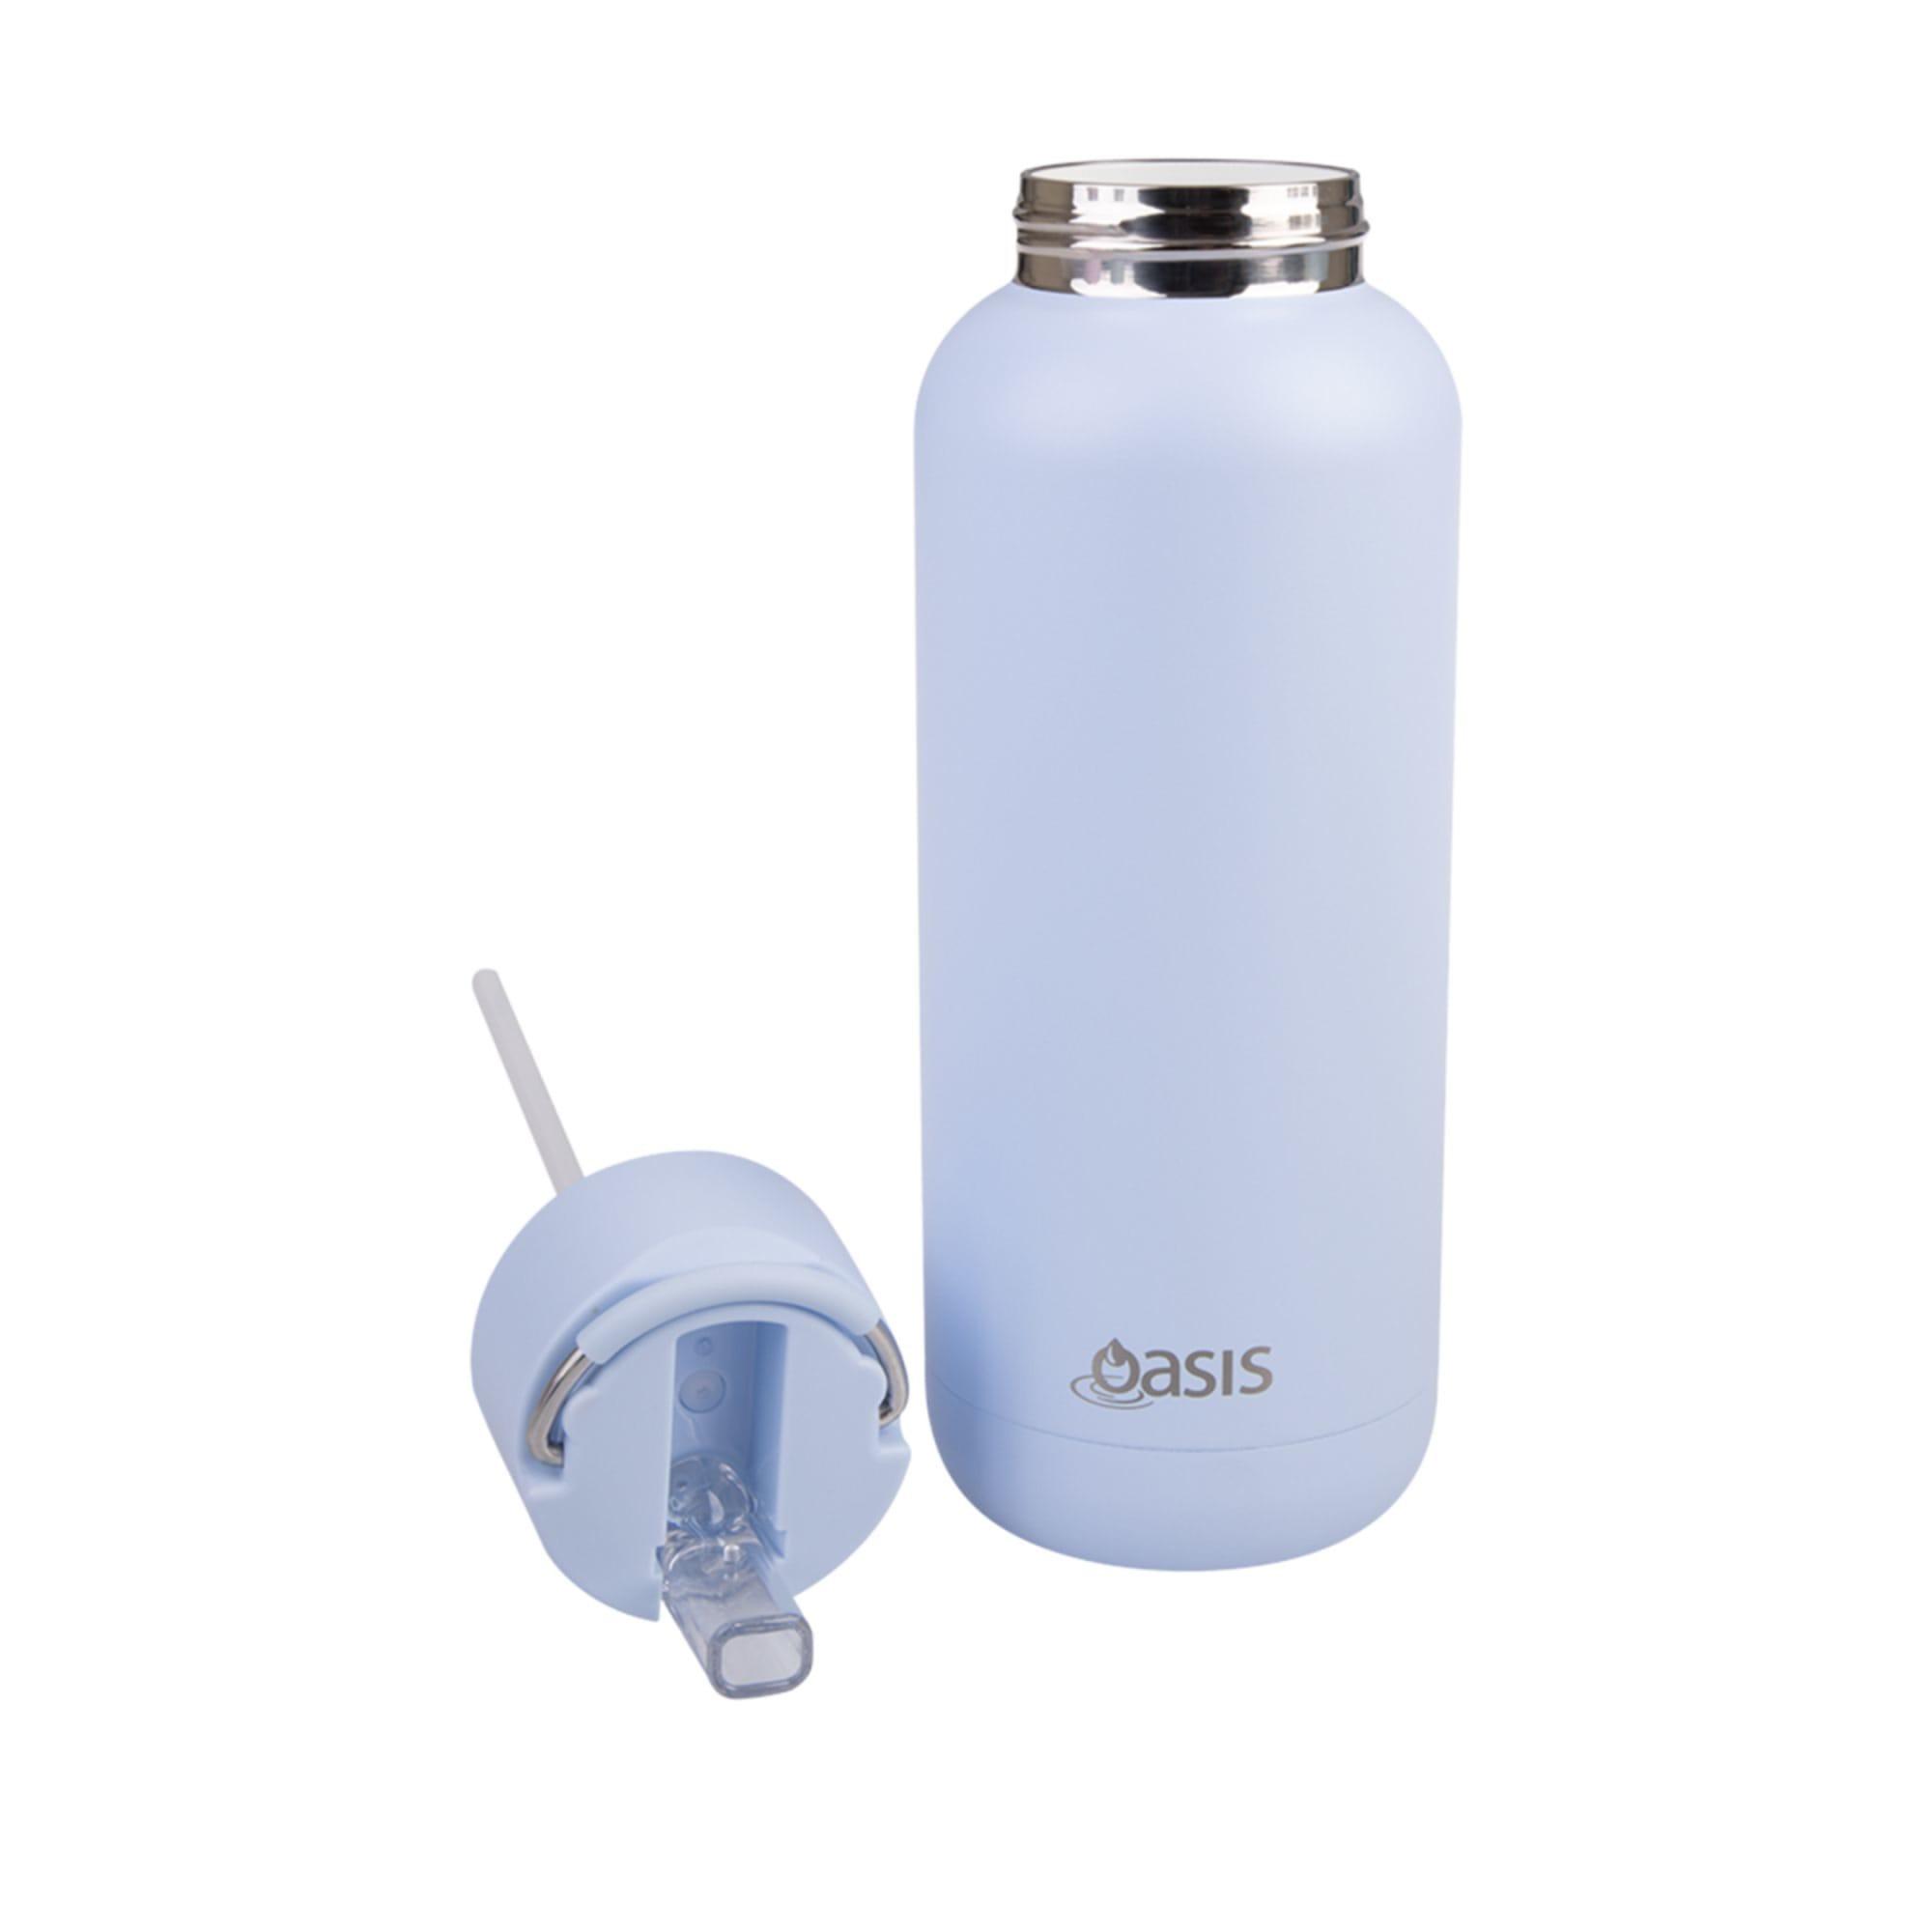 Oasis Moda Triple Wall Insulated Drink Bottle 1L Periwinkle Image 3